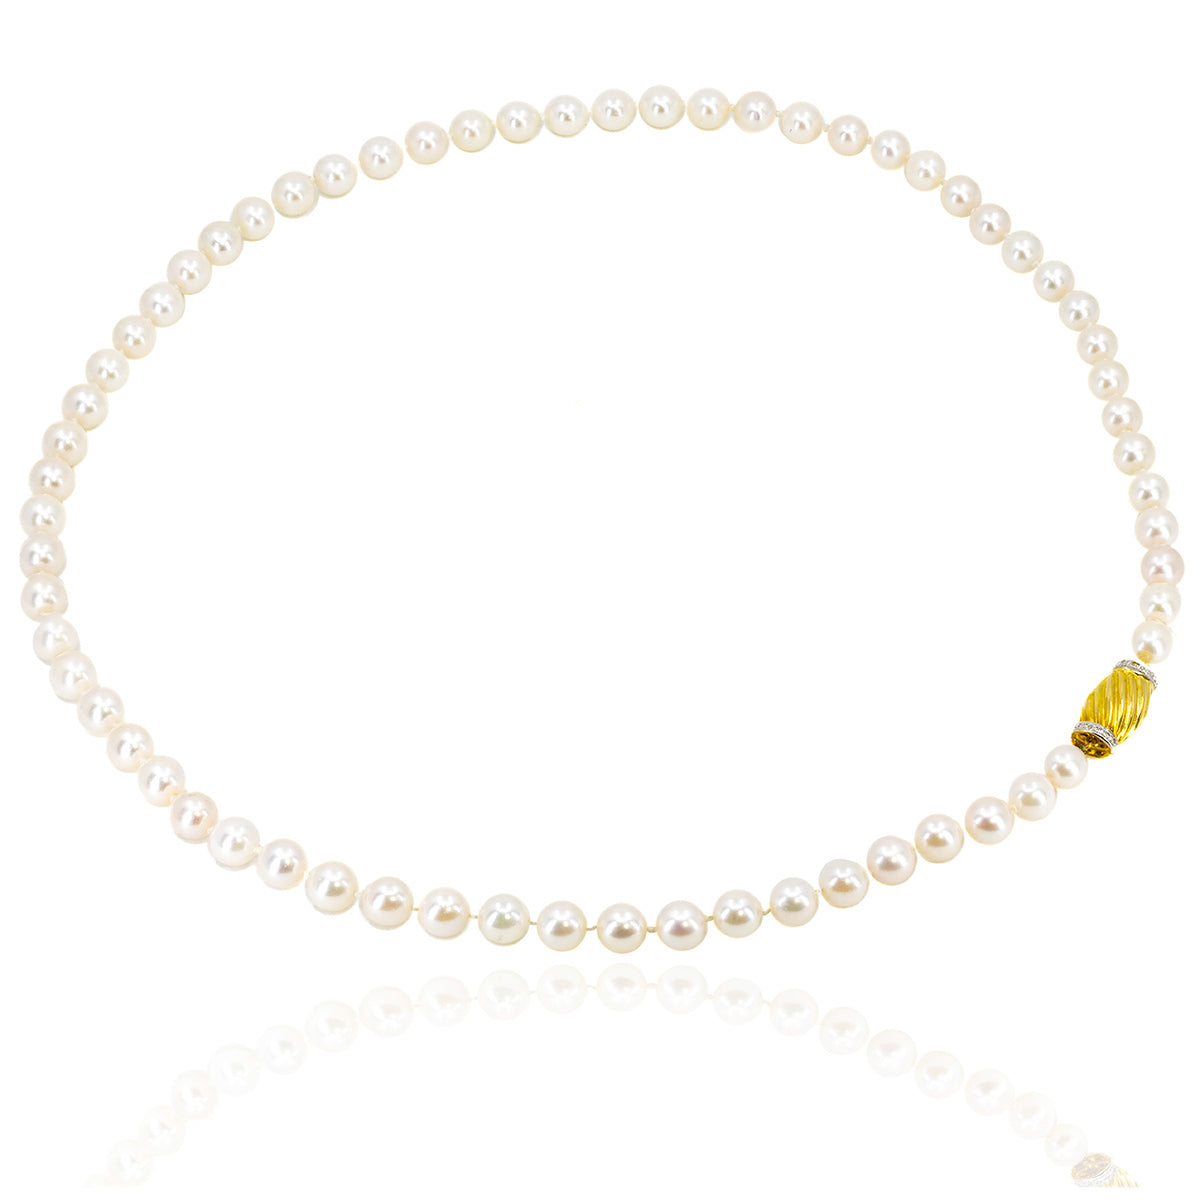 8mm Akoya Pearl Necklace